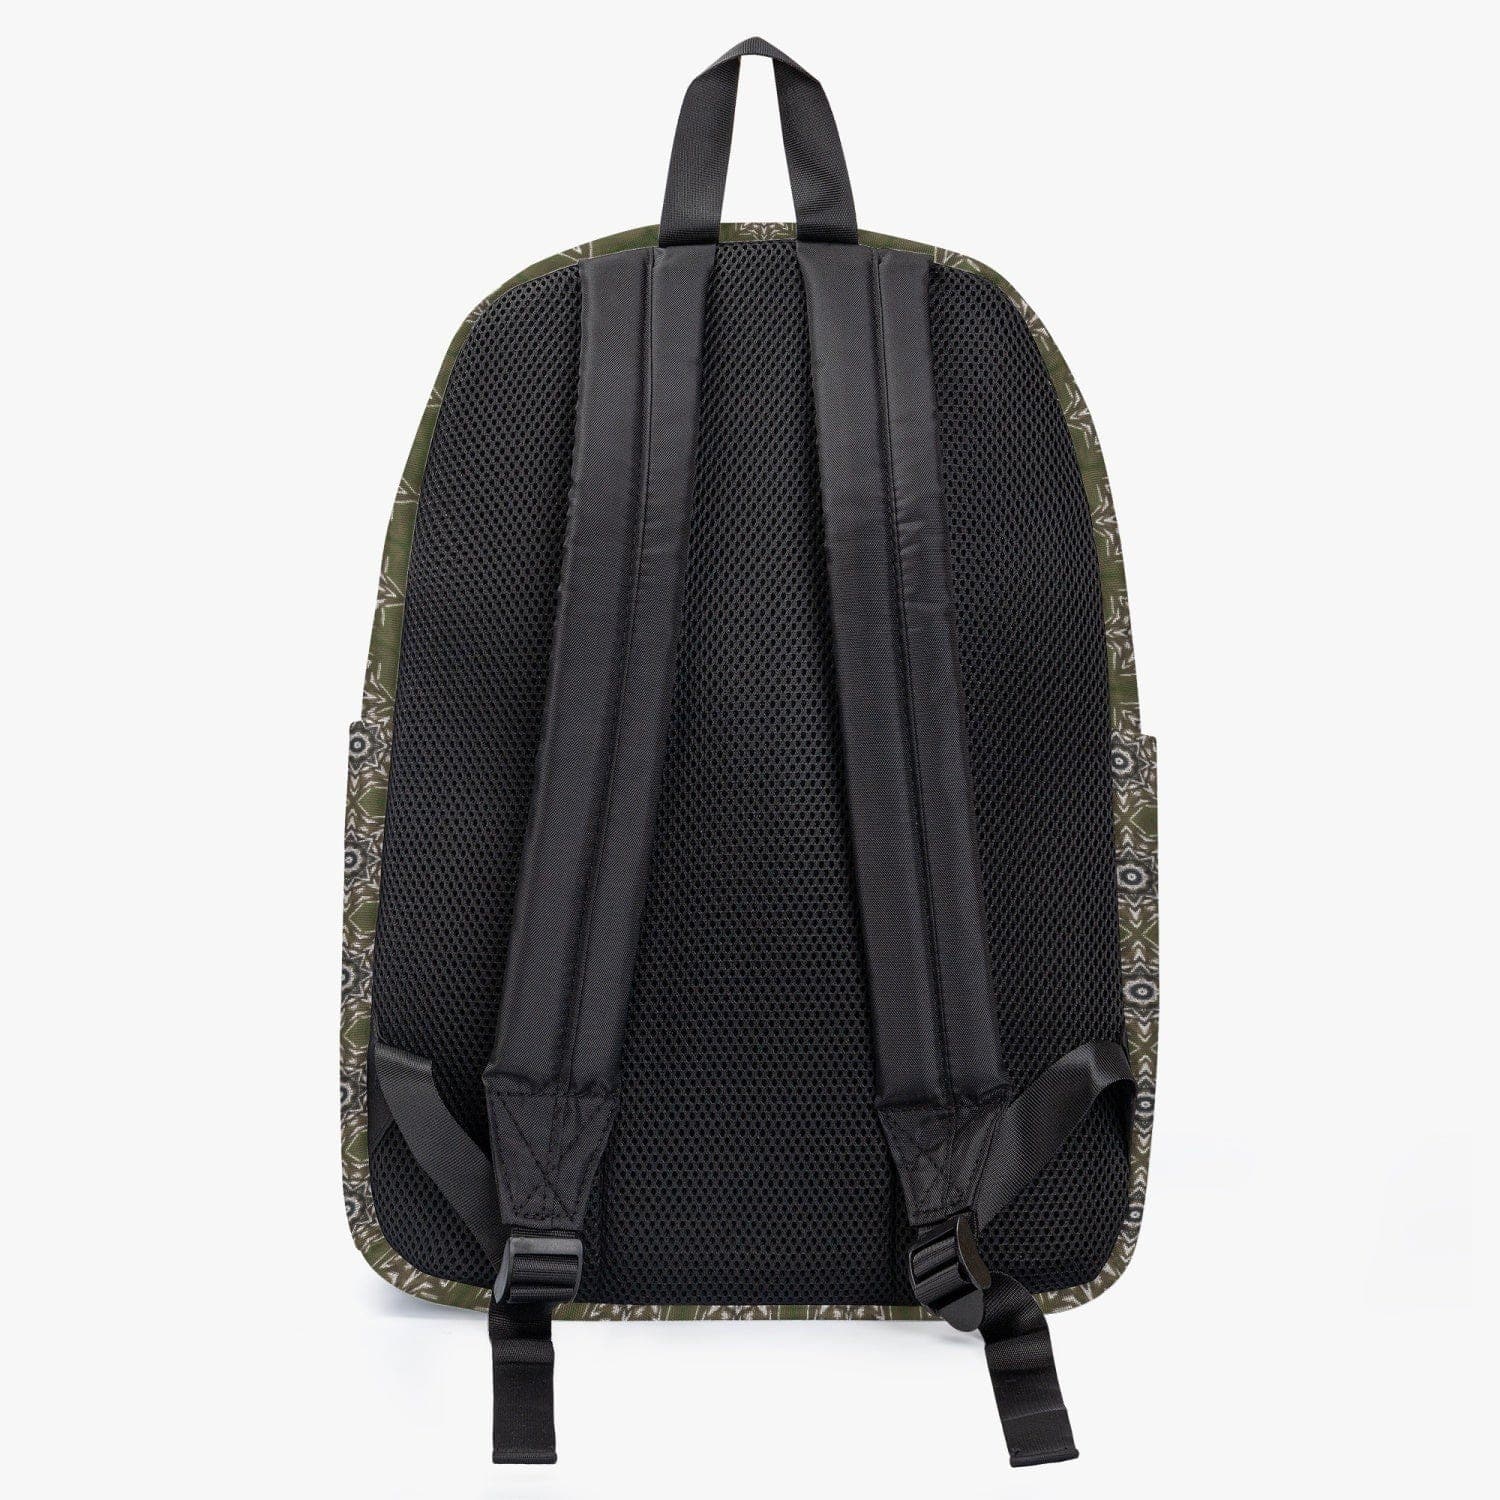 Light in the forest, Canvas Backpack, designed by Sensus Studio Design